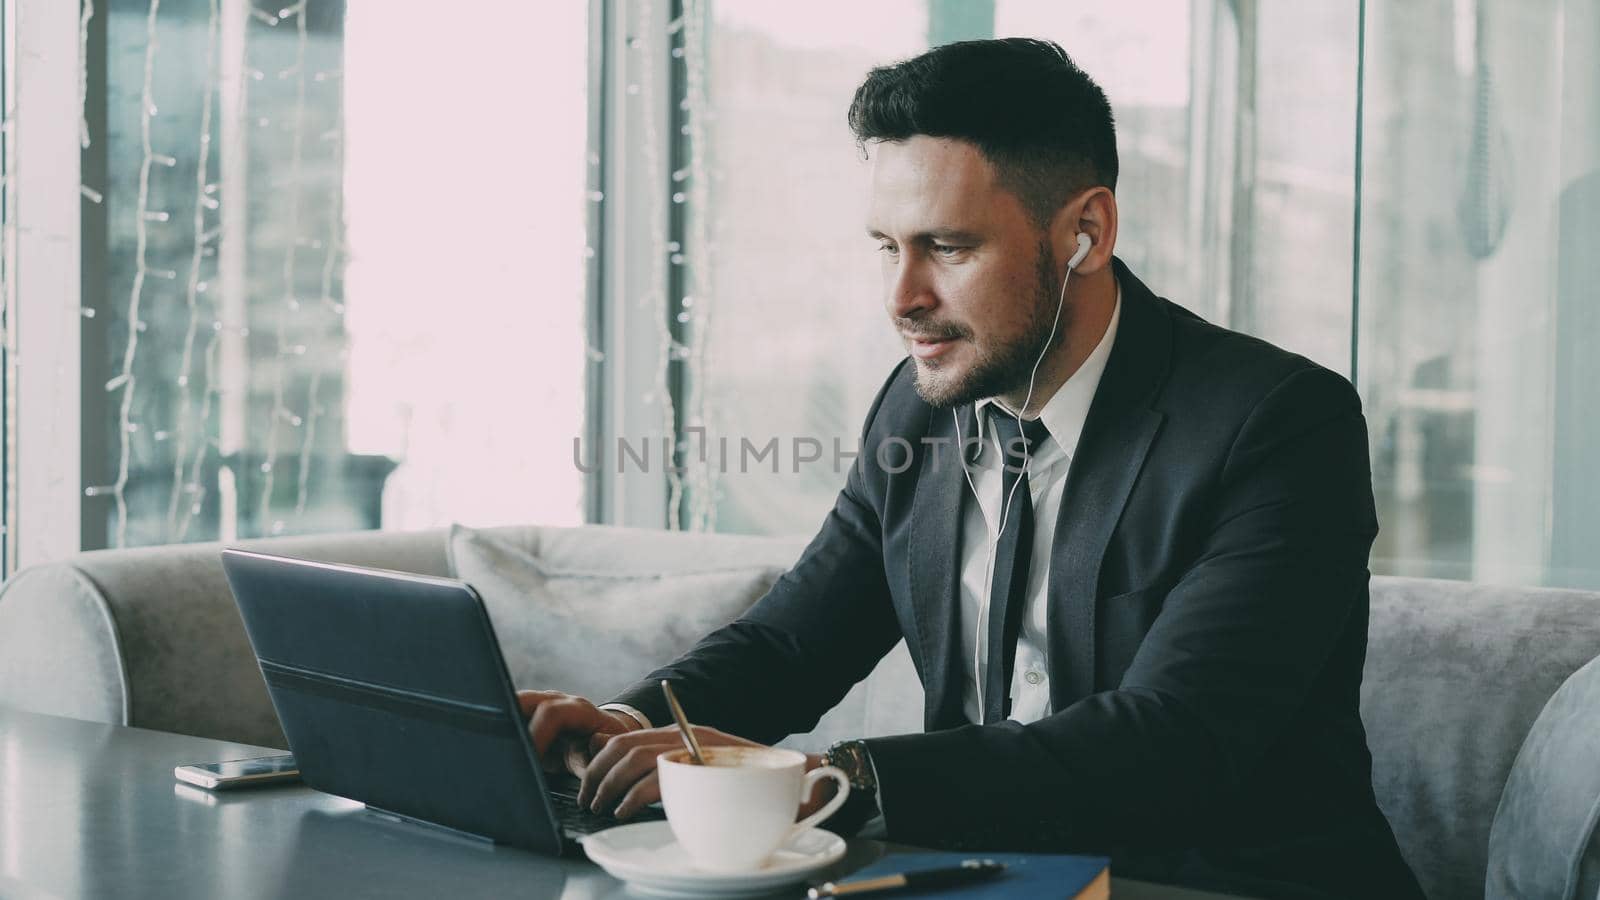 Happy Caucasian entrepreneur in formal clothes typing on his laptop while listening to music with earbuds in his ears in a modern cafe during lunch by silverkblack